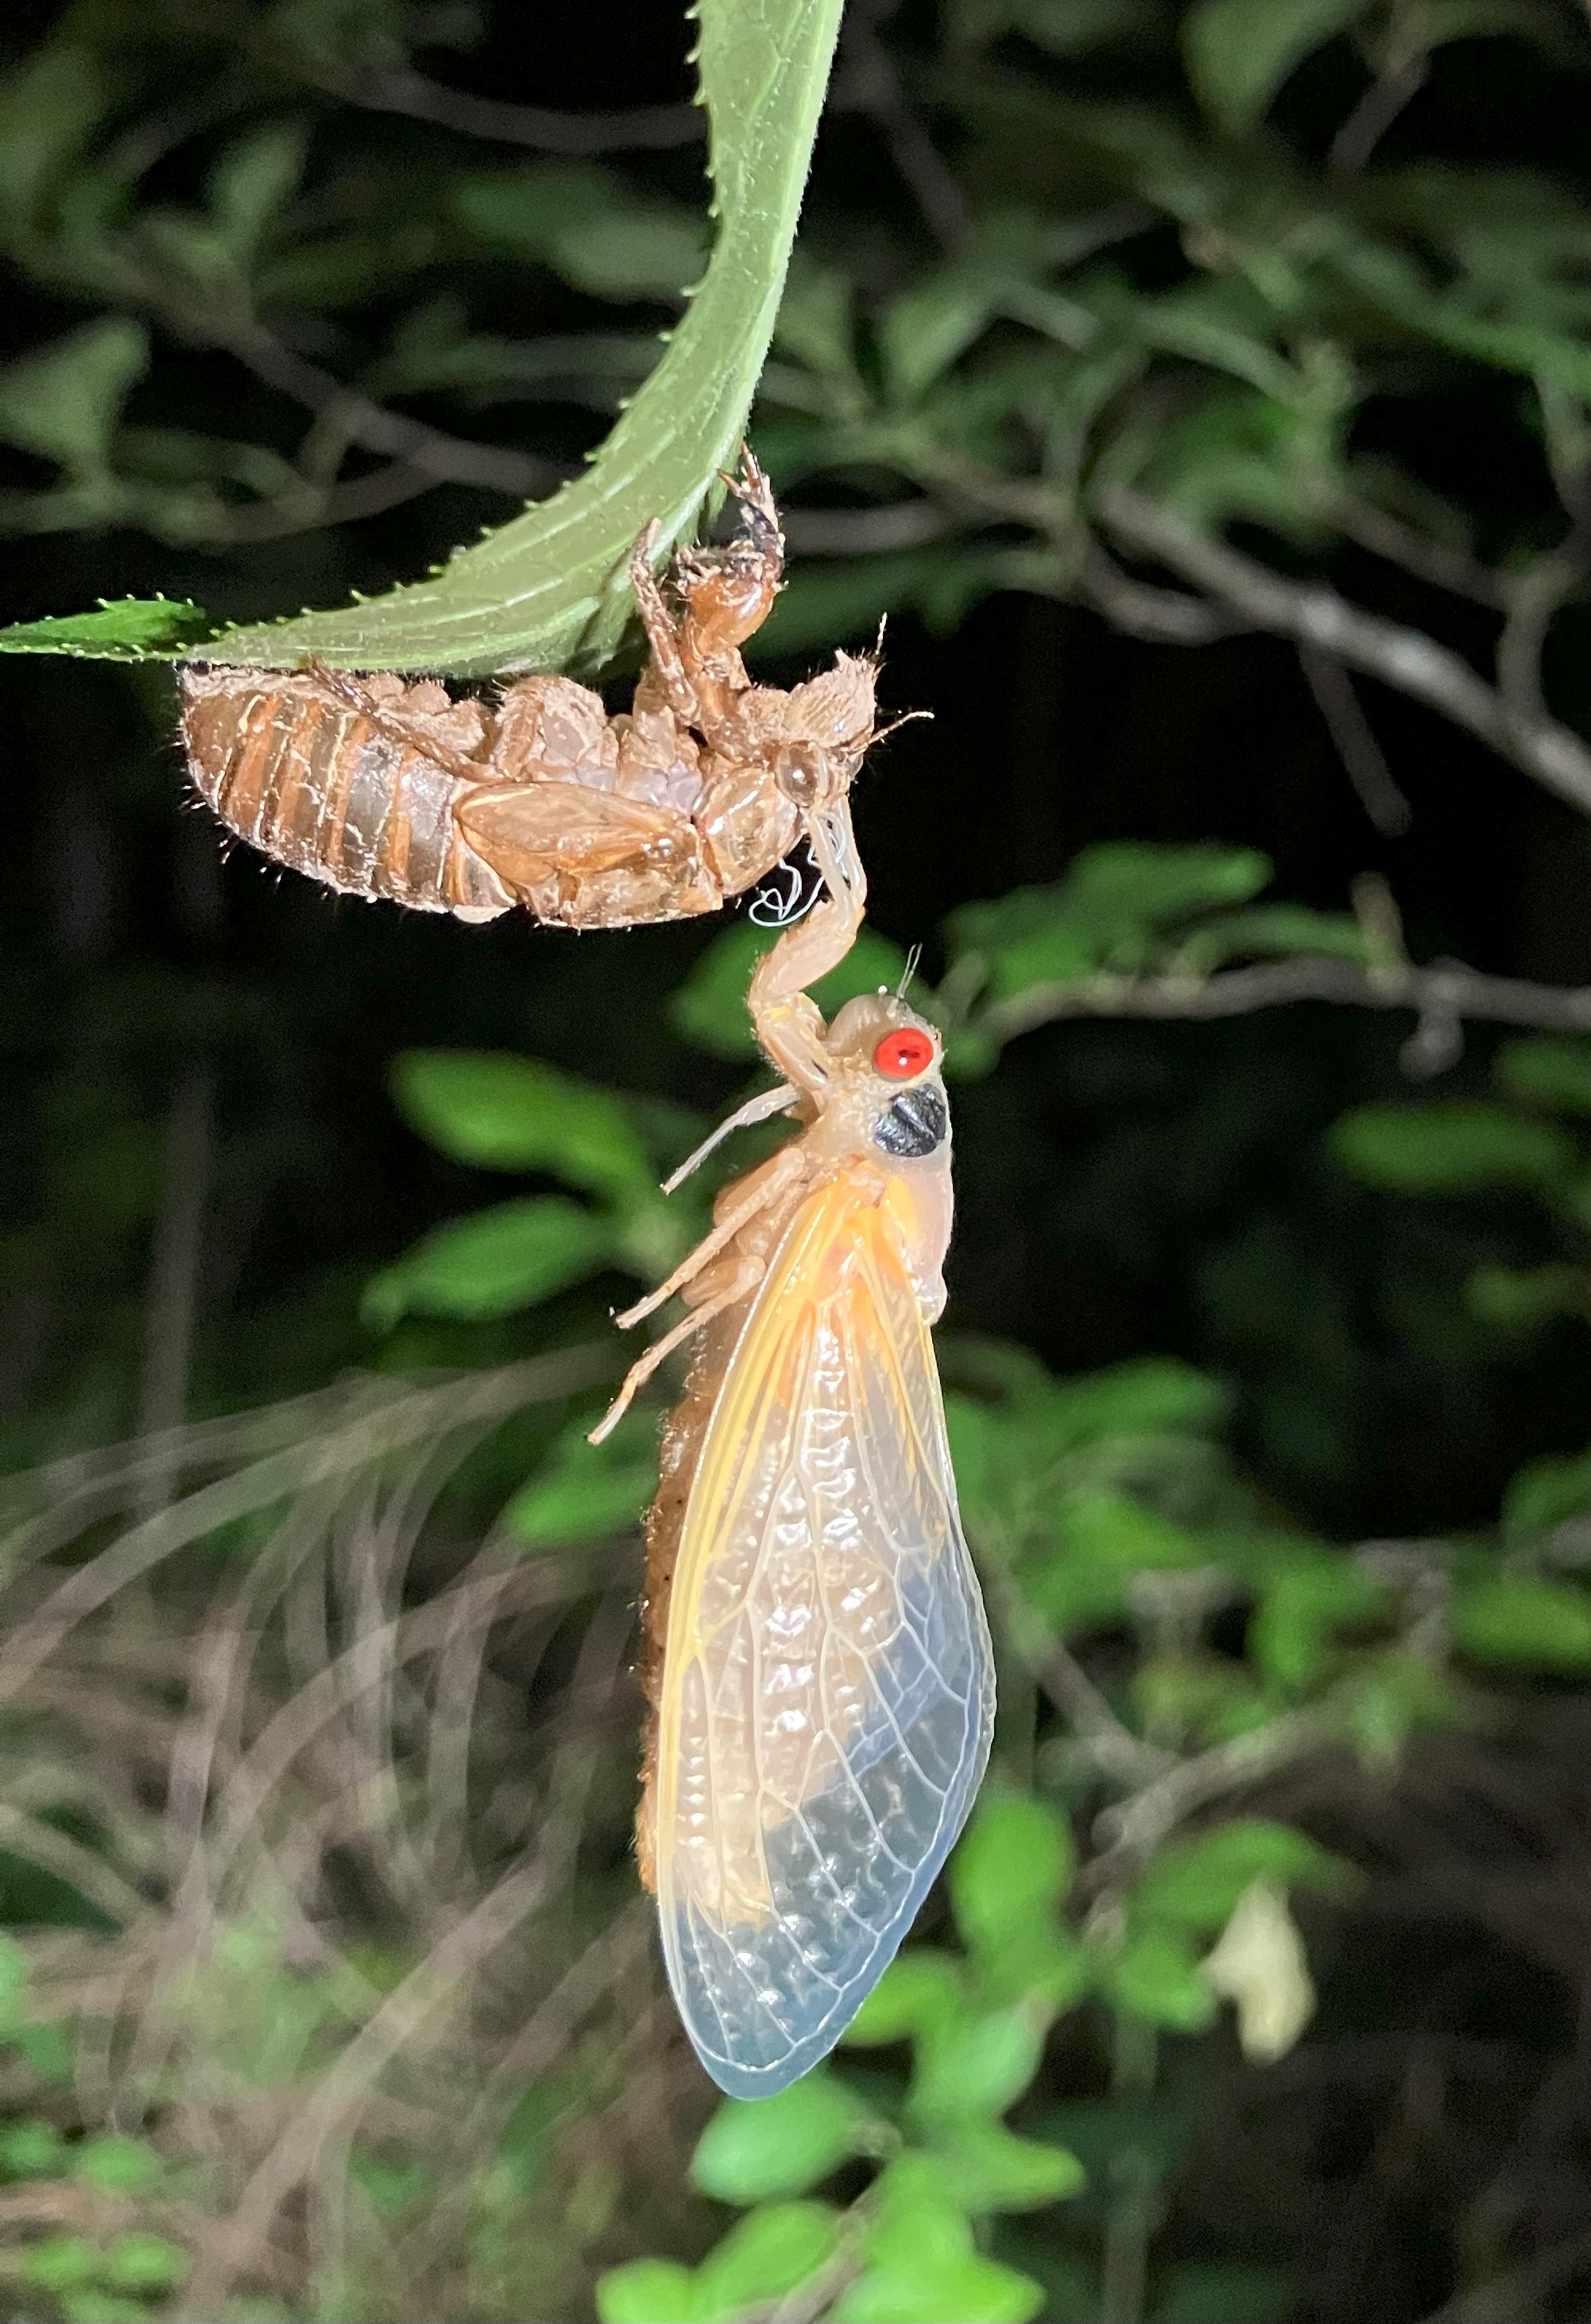 The adult is hanging by its forelimbs from its nymph exoskeleton